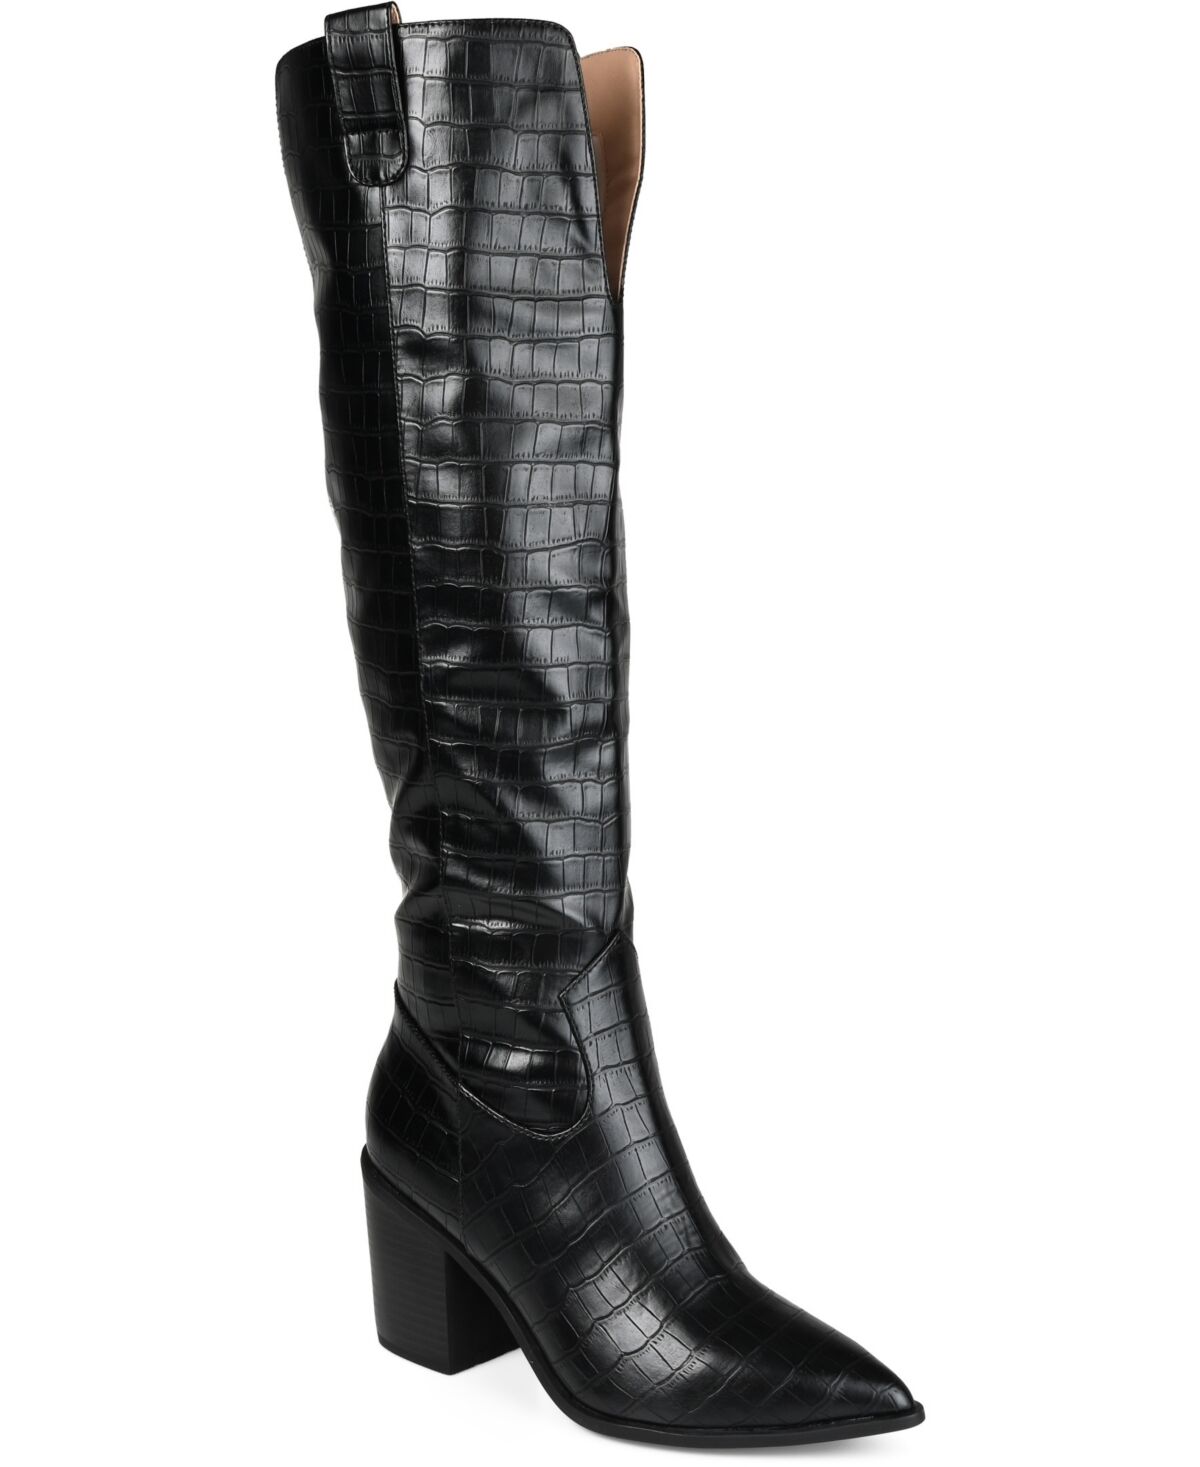 Journee Collection Women's Therese Extra Wide Calf Cowboy Boots - Black